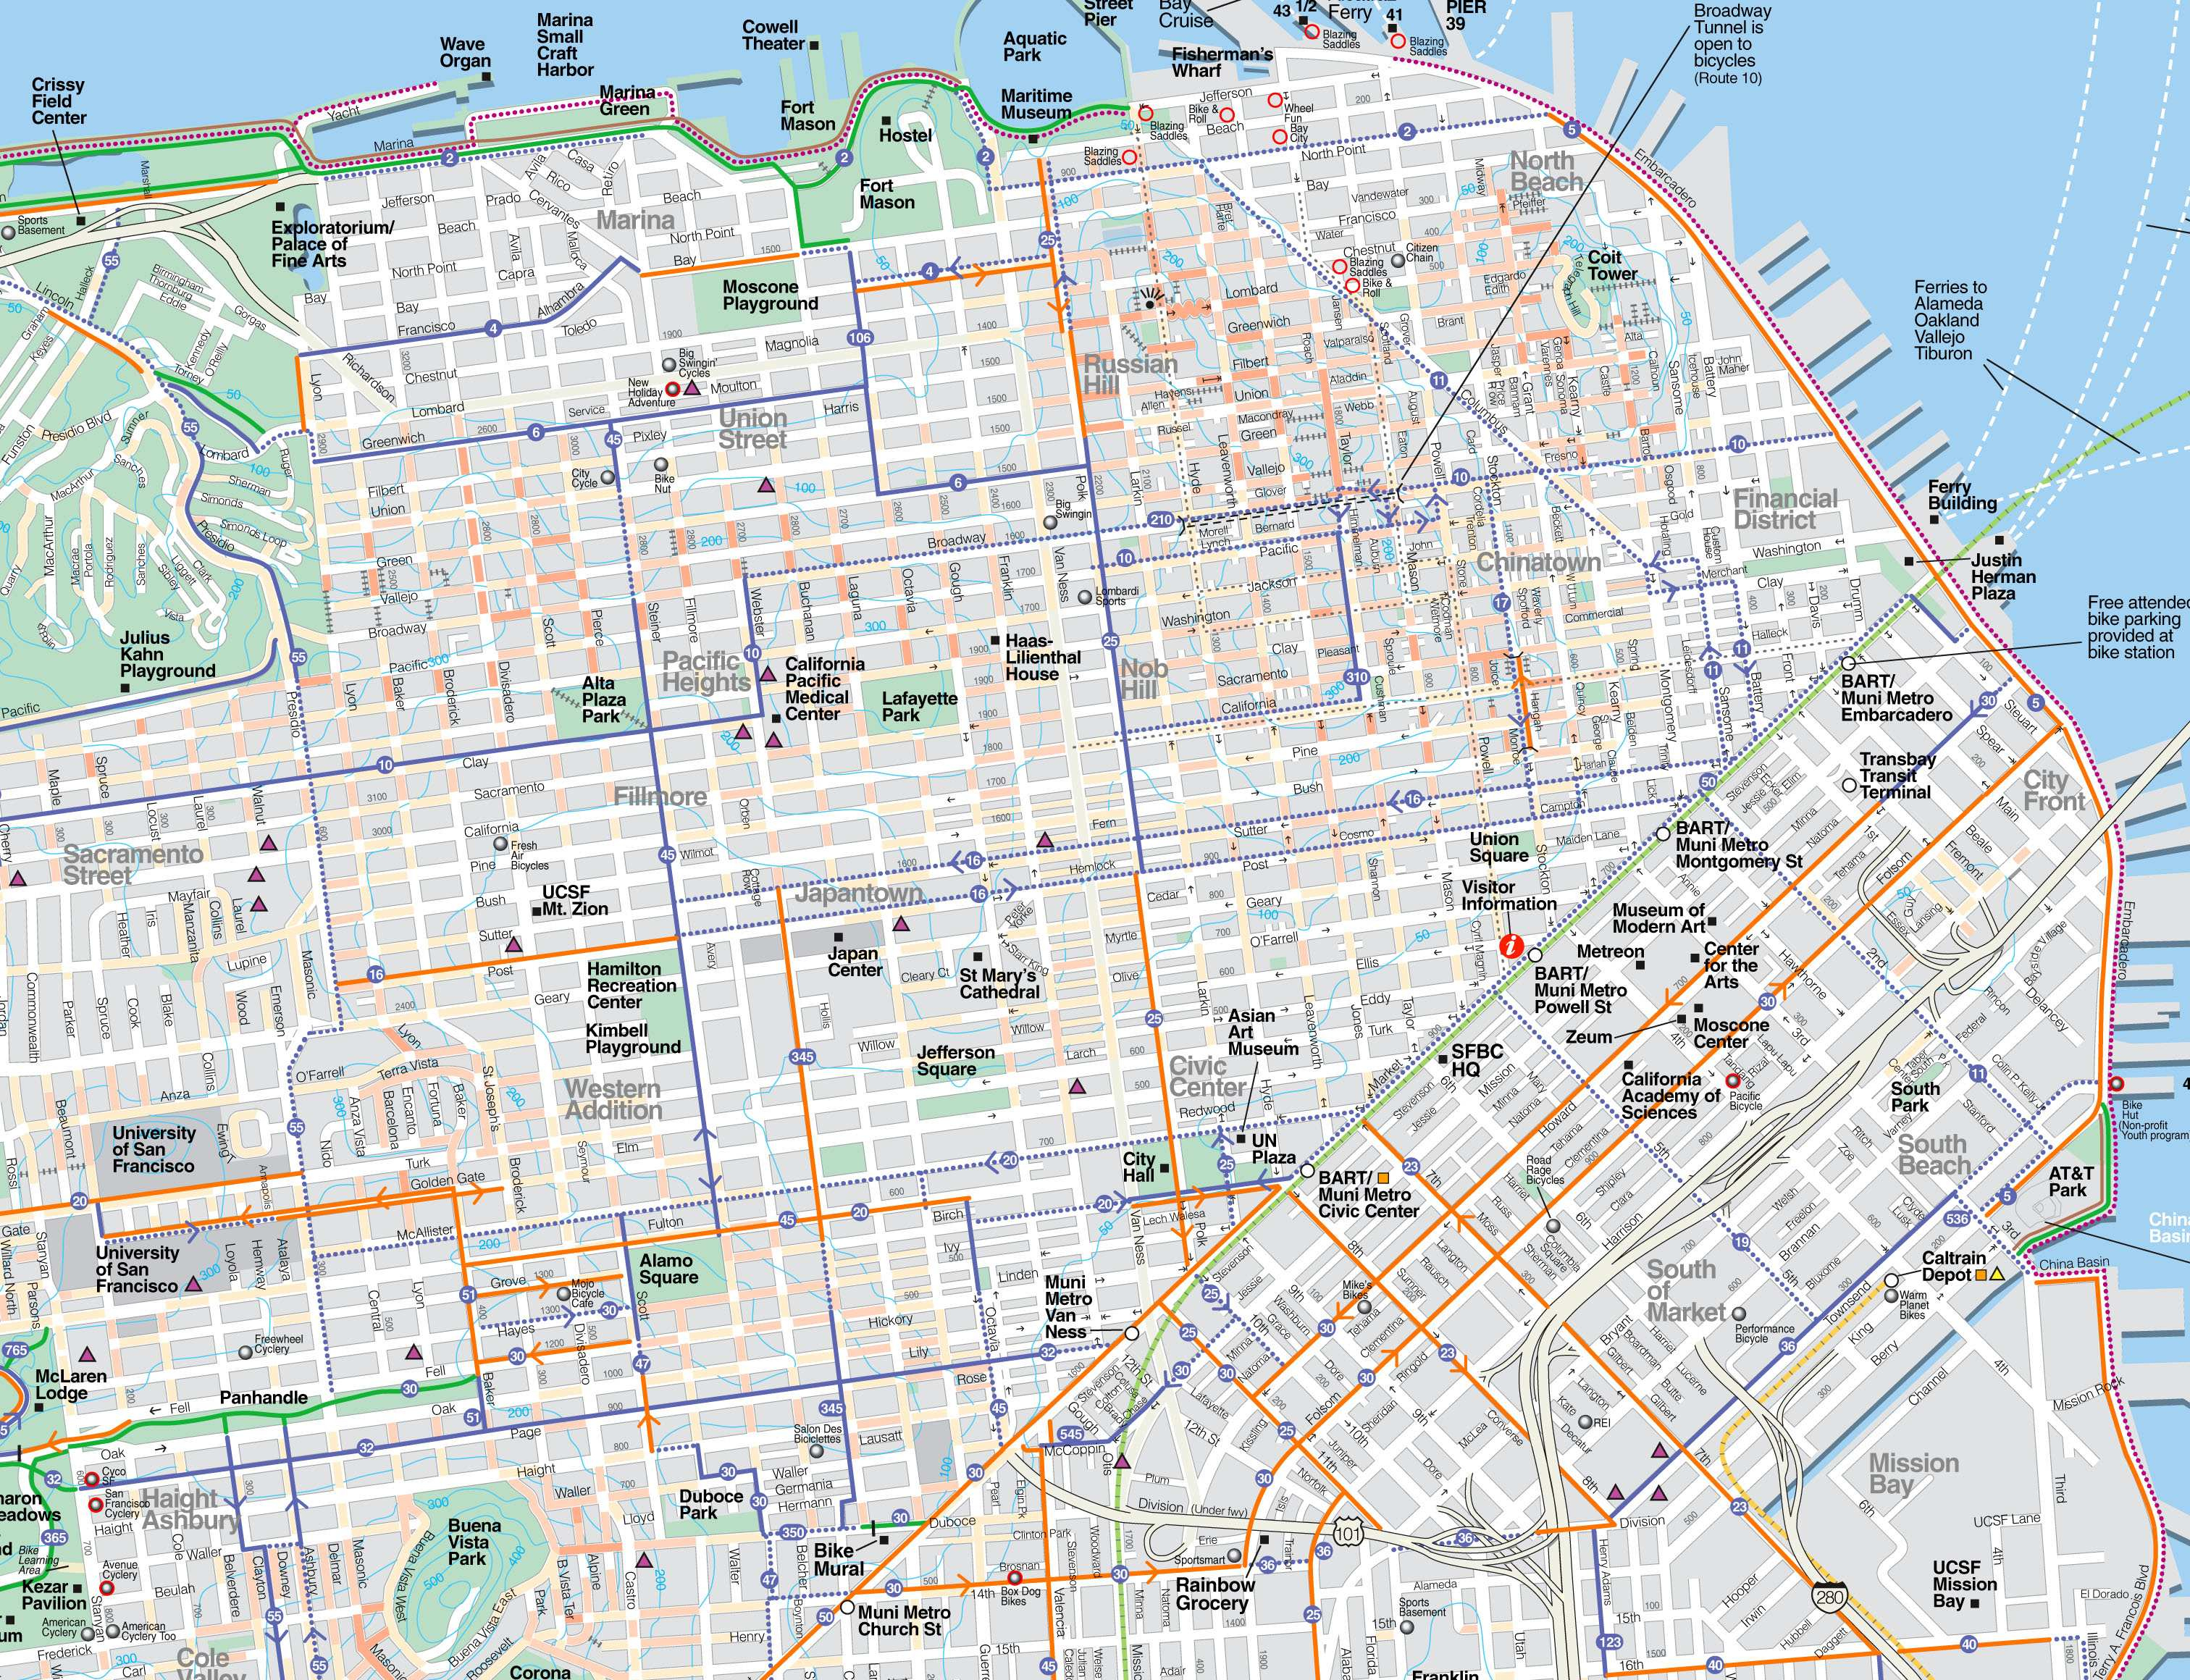 Large San Francisco Maps For Free Download And Print | High - Printable Map Of San Francisco Tourist Attractions